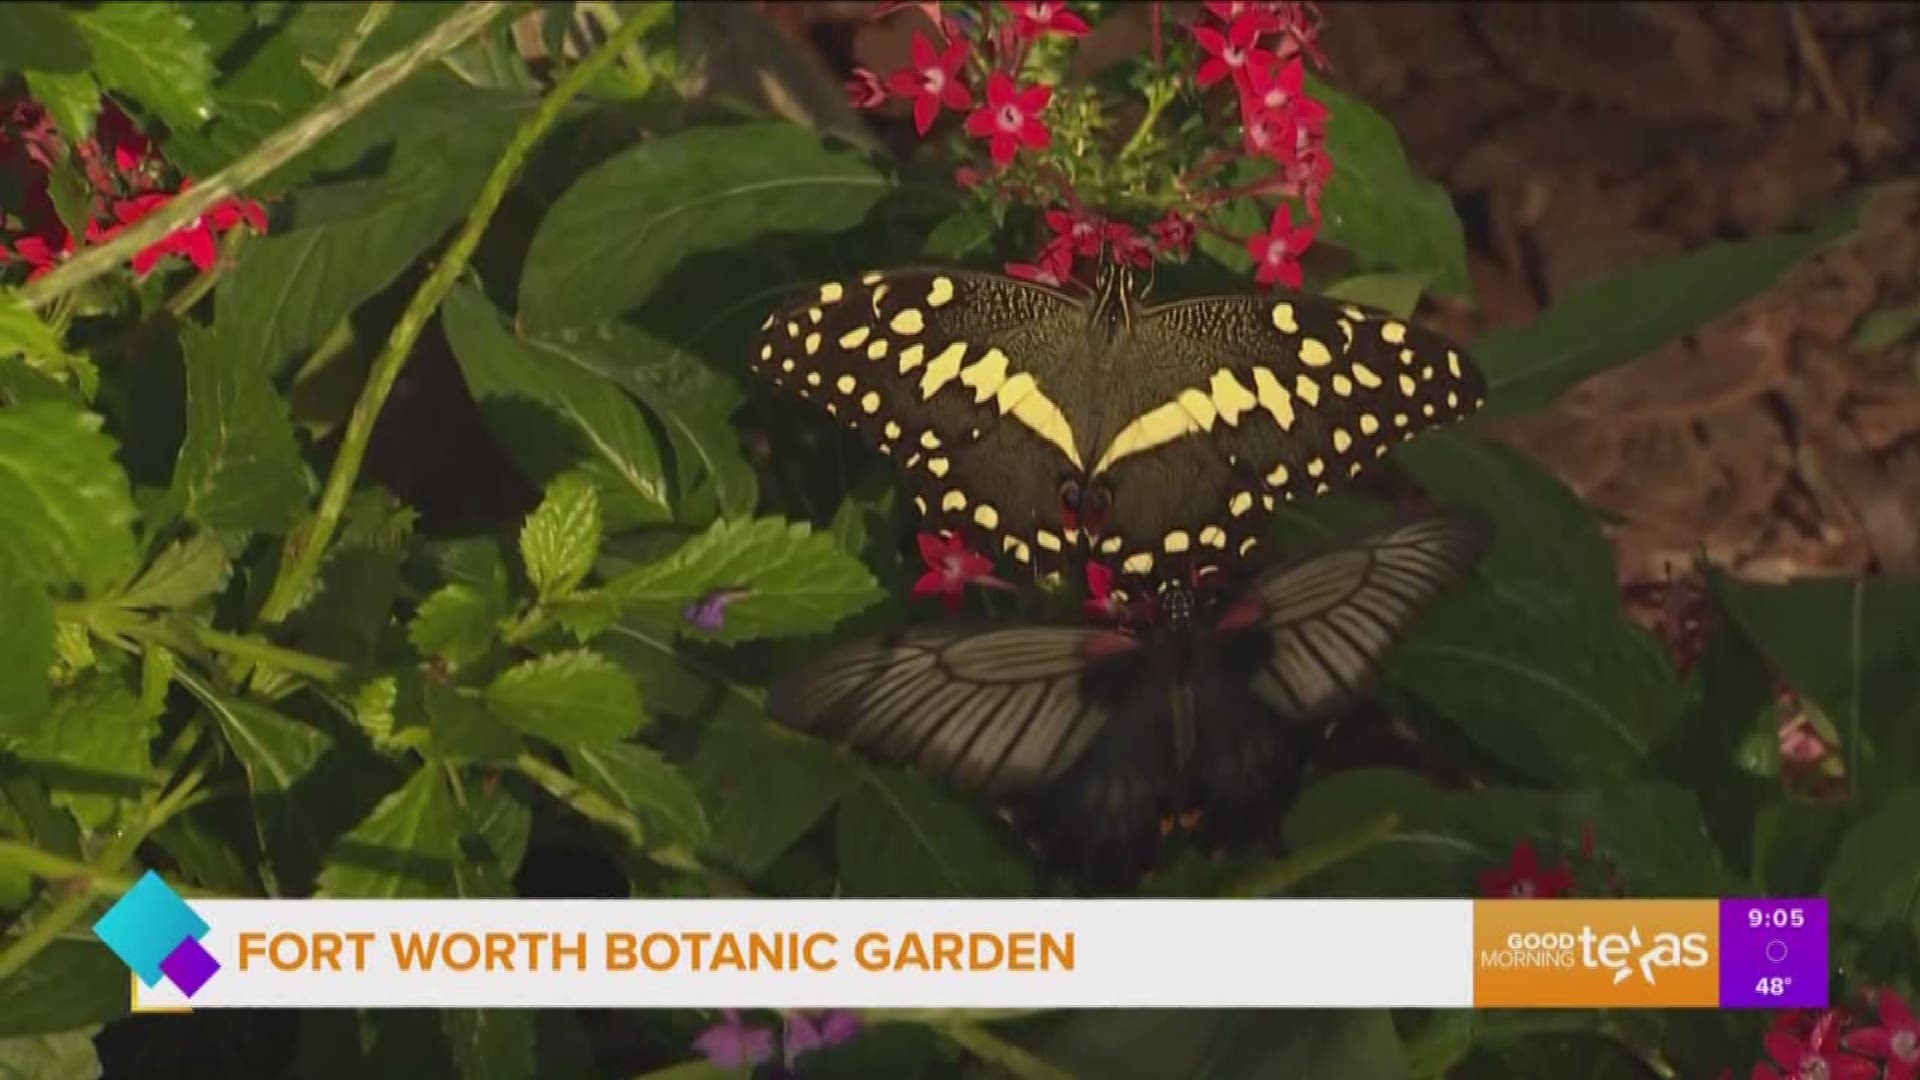 The Botanical Research Institute of Texas’ Butterflies in the Garden exhibit is February 29 – April 12.   Go to www.fwbg.org for information.